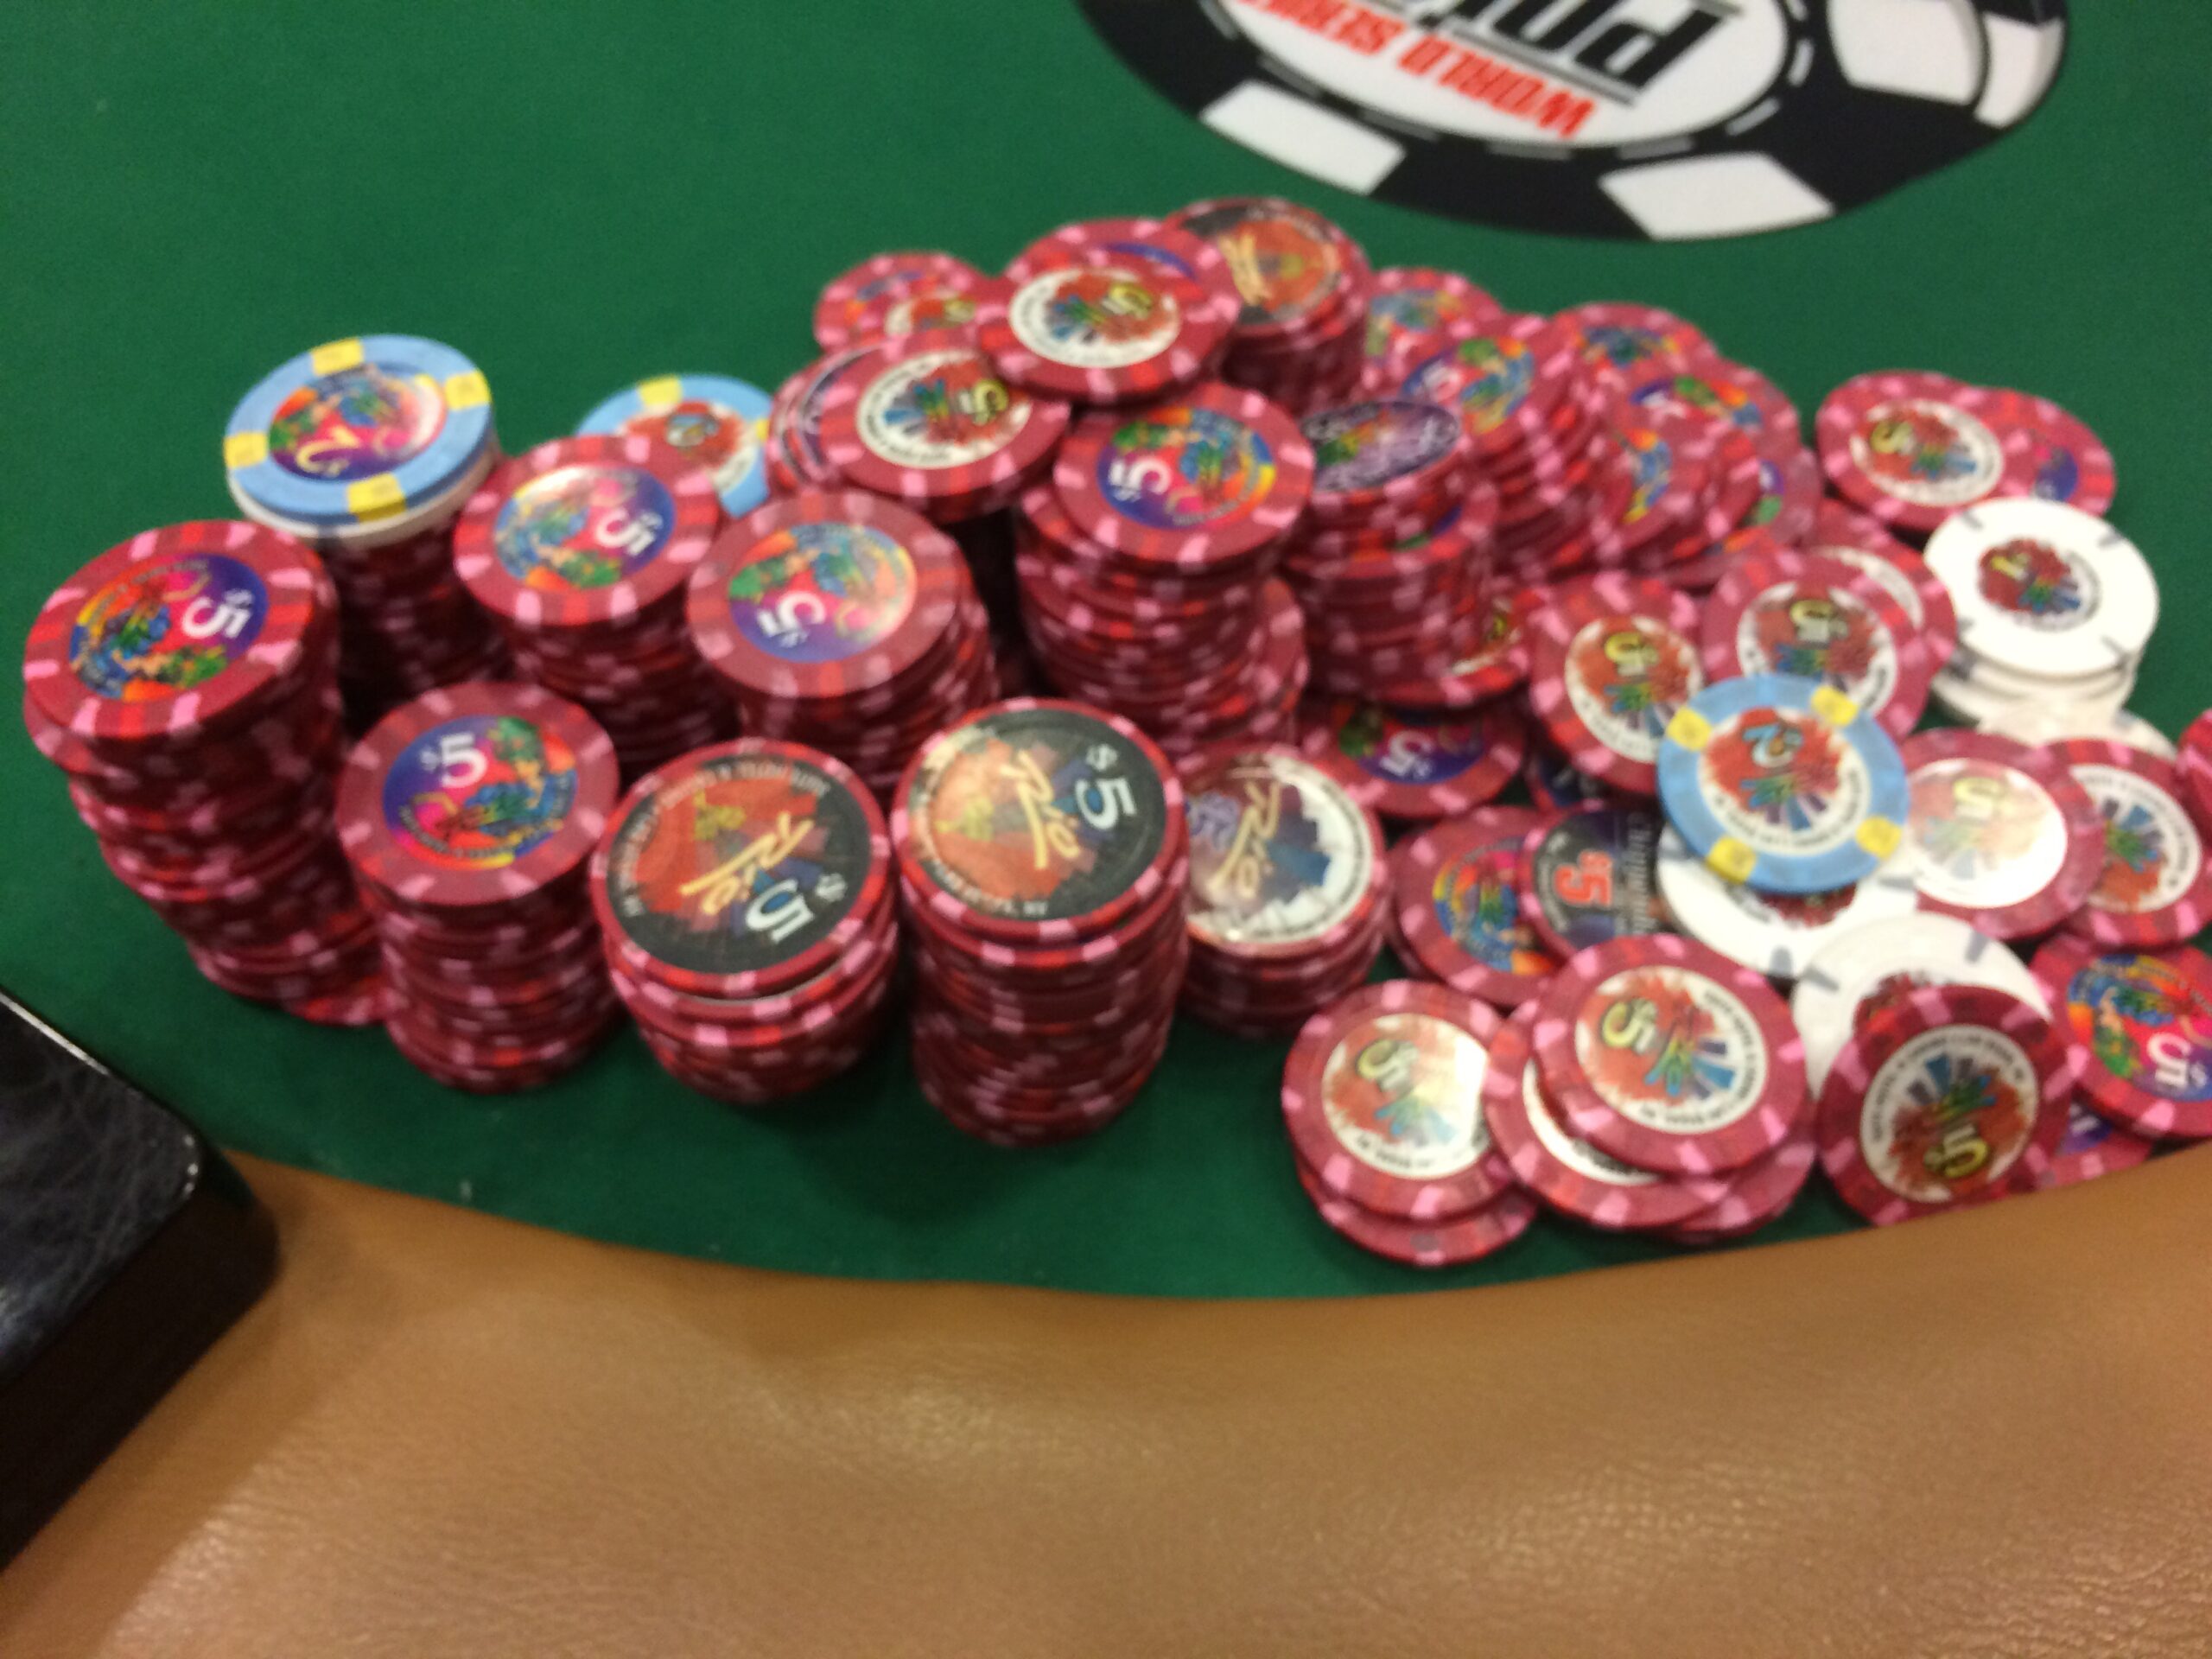 In December, Play Down to the Wire with End-of-Year Poker Tournaments